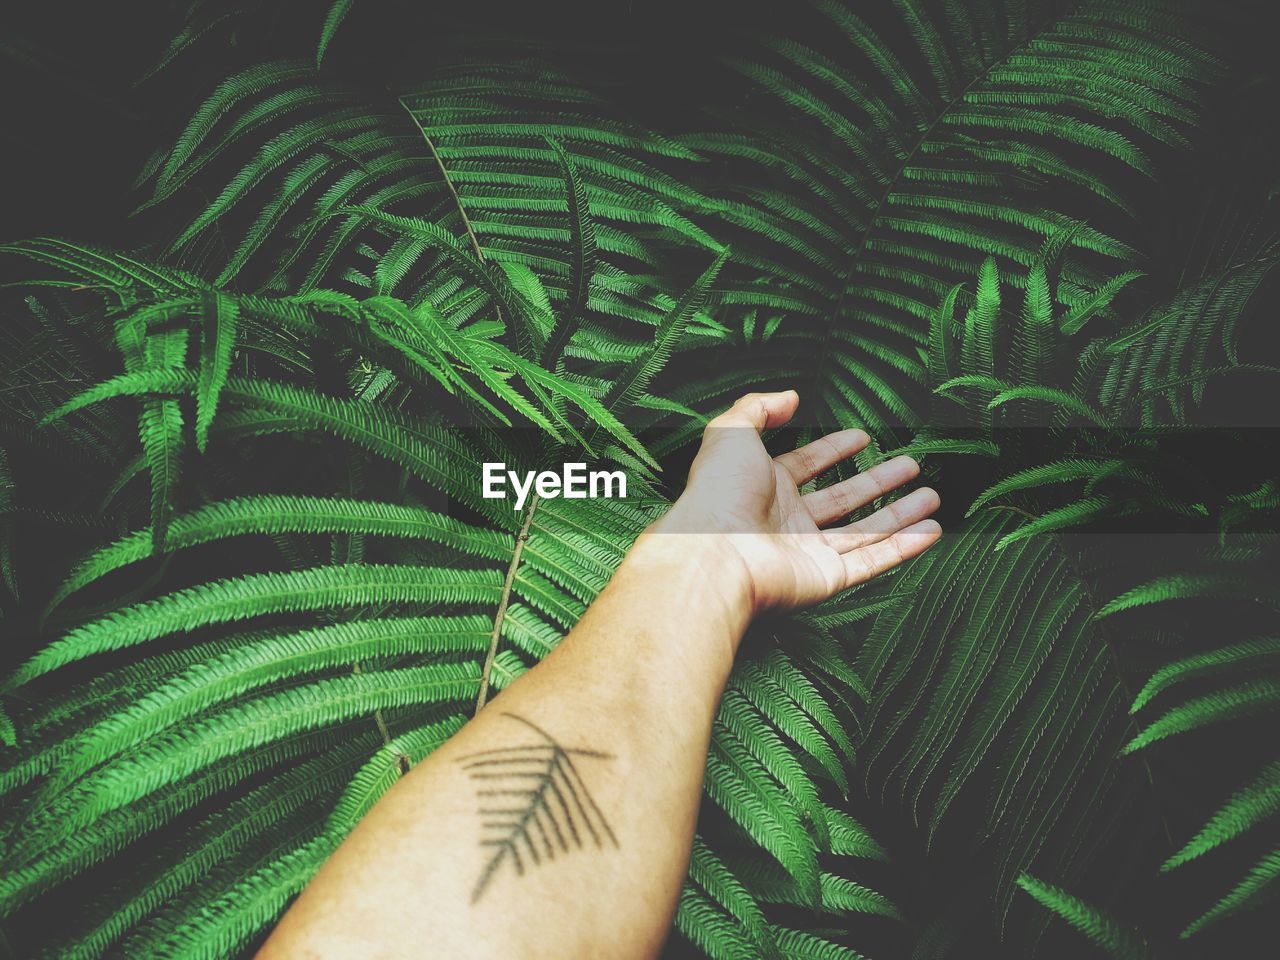 Cropped hand of woman on plants